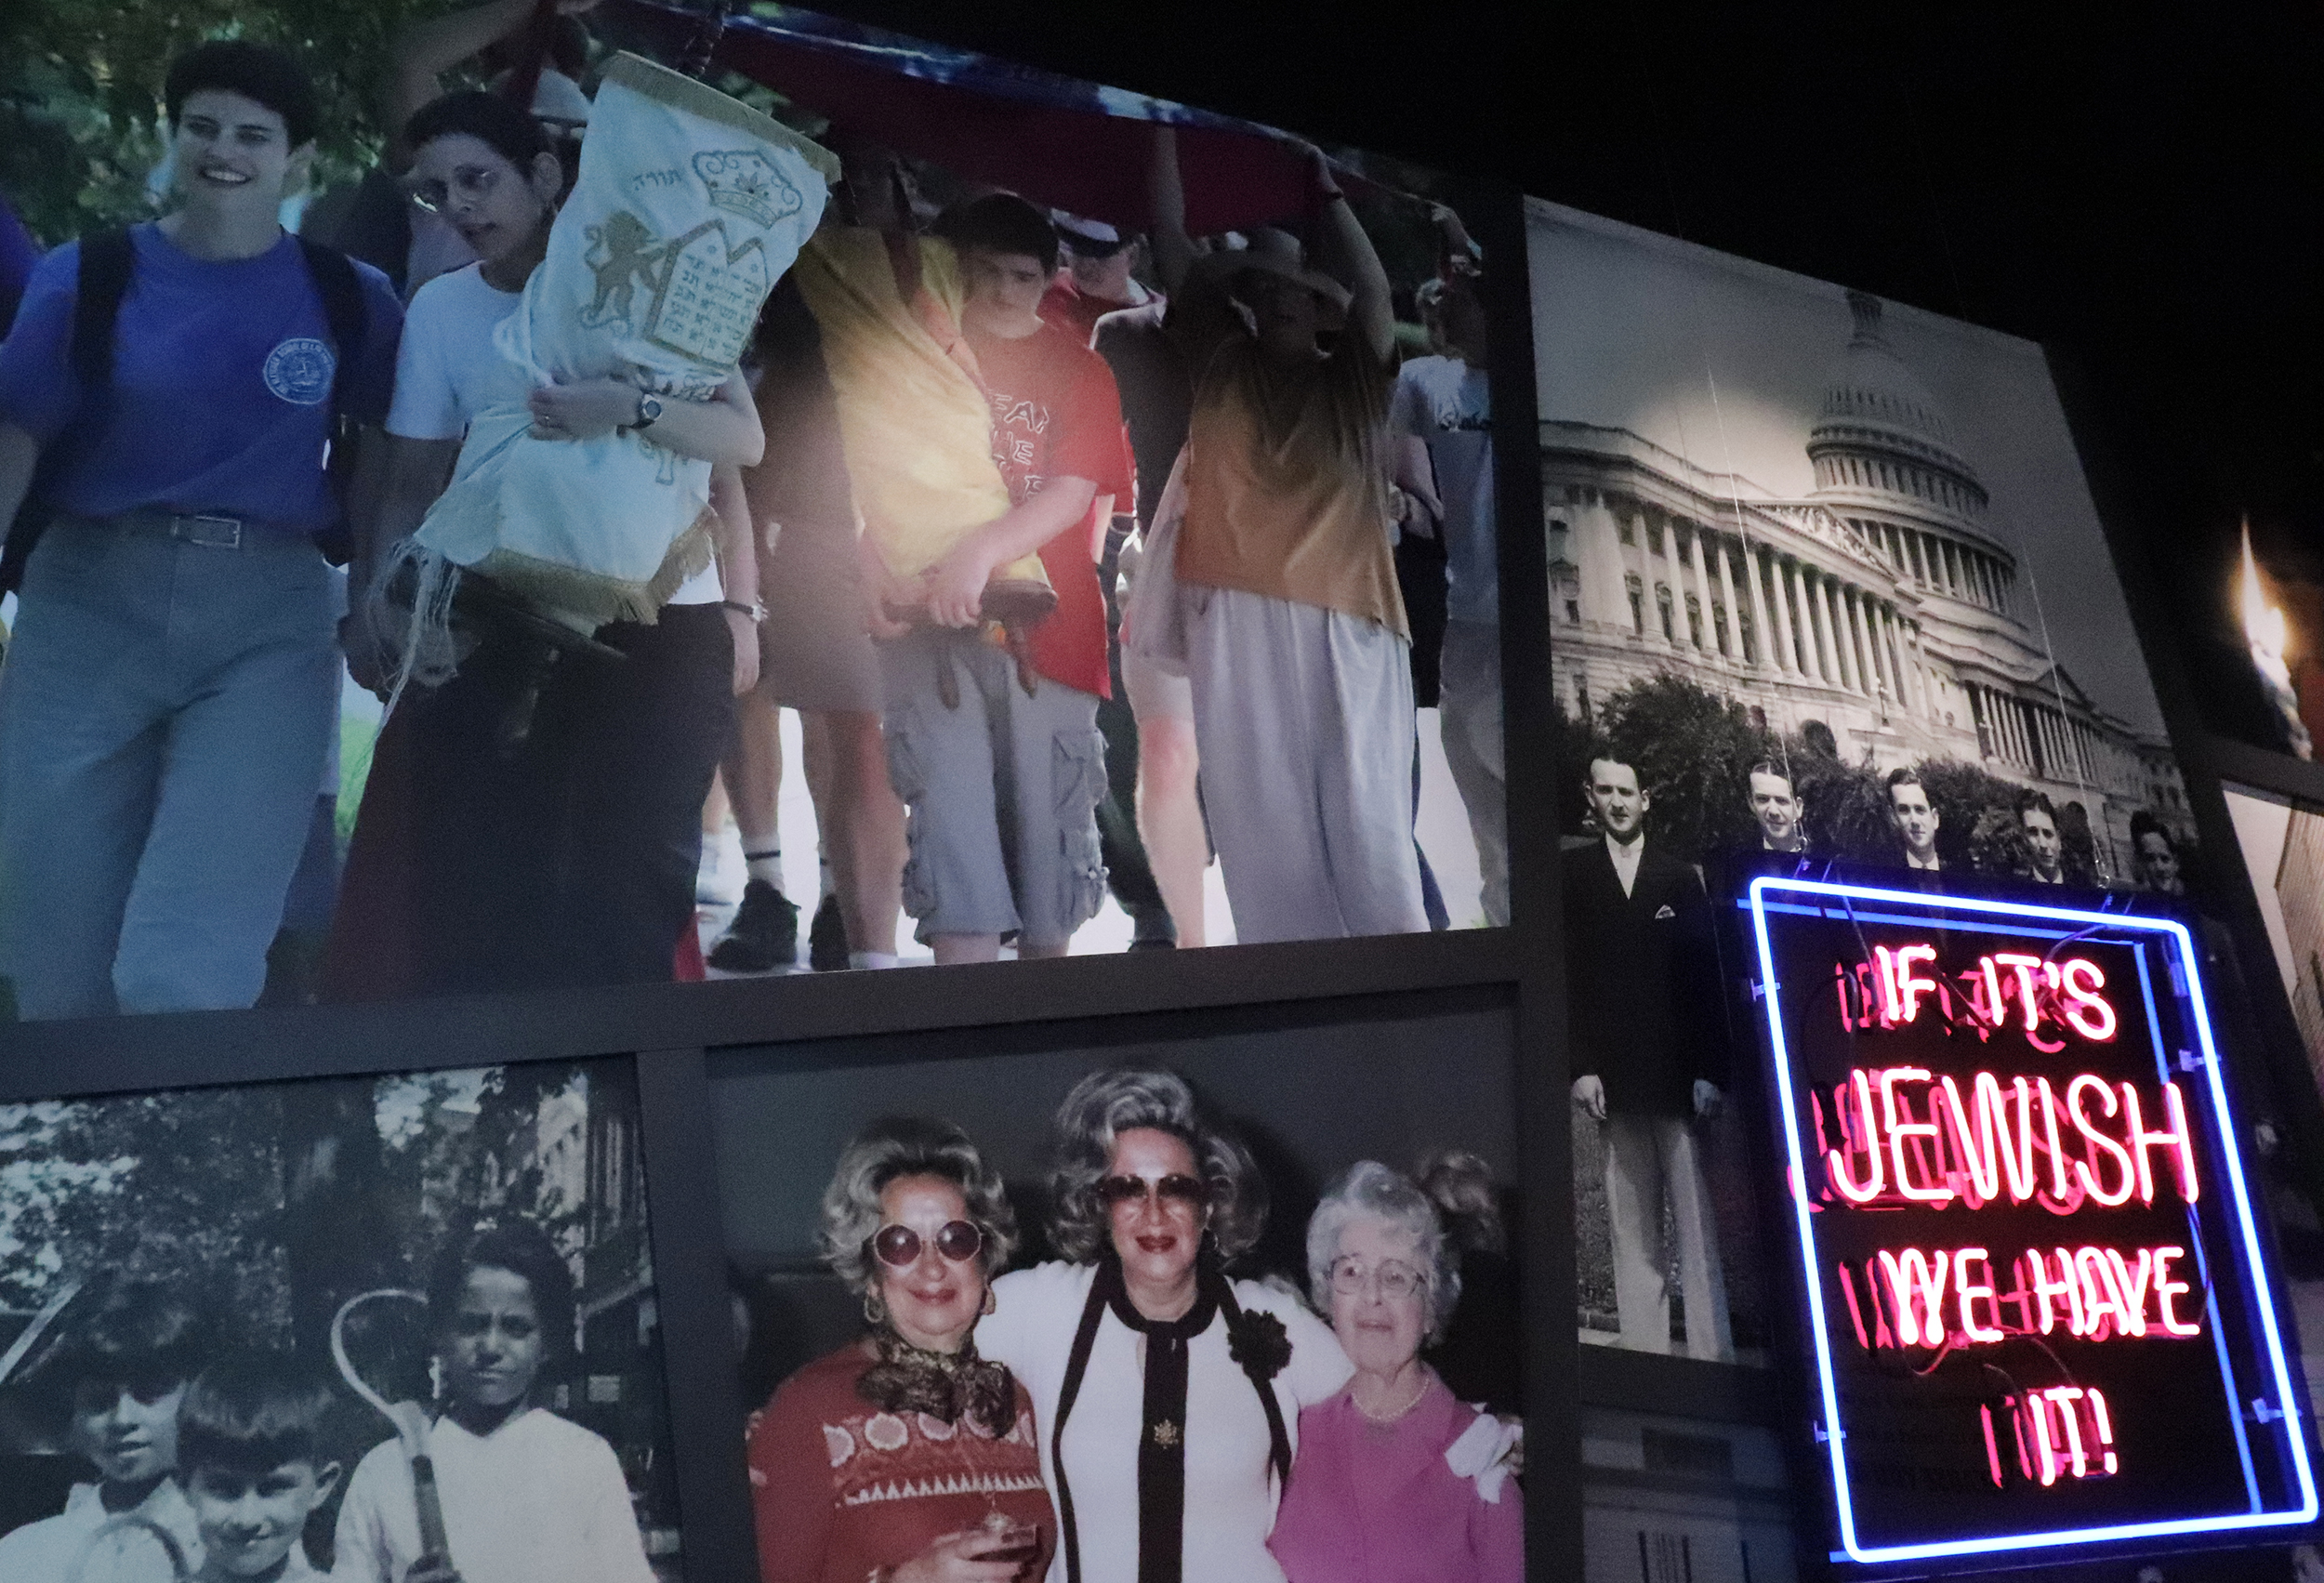 A collage of photographs celebrating members of the Jewish community fill a wall in the Capital Jewish Museum, including an image of members of a Jewish fellowship moving their Torah scrolls on June 1, 2023. RNS photo by Adelle M. Banks